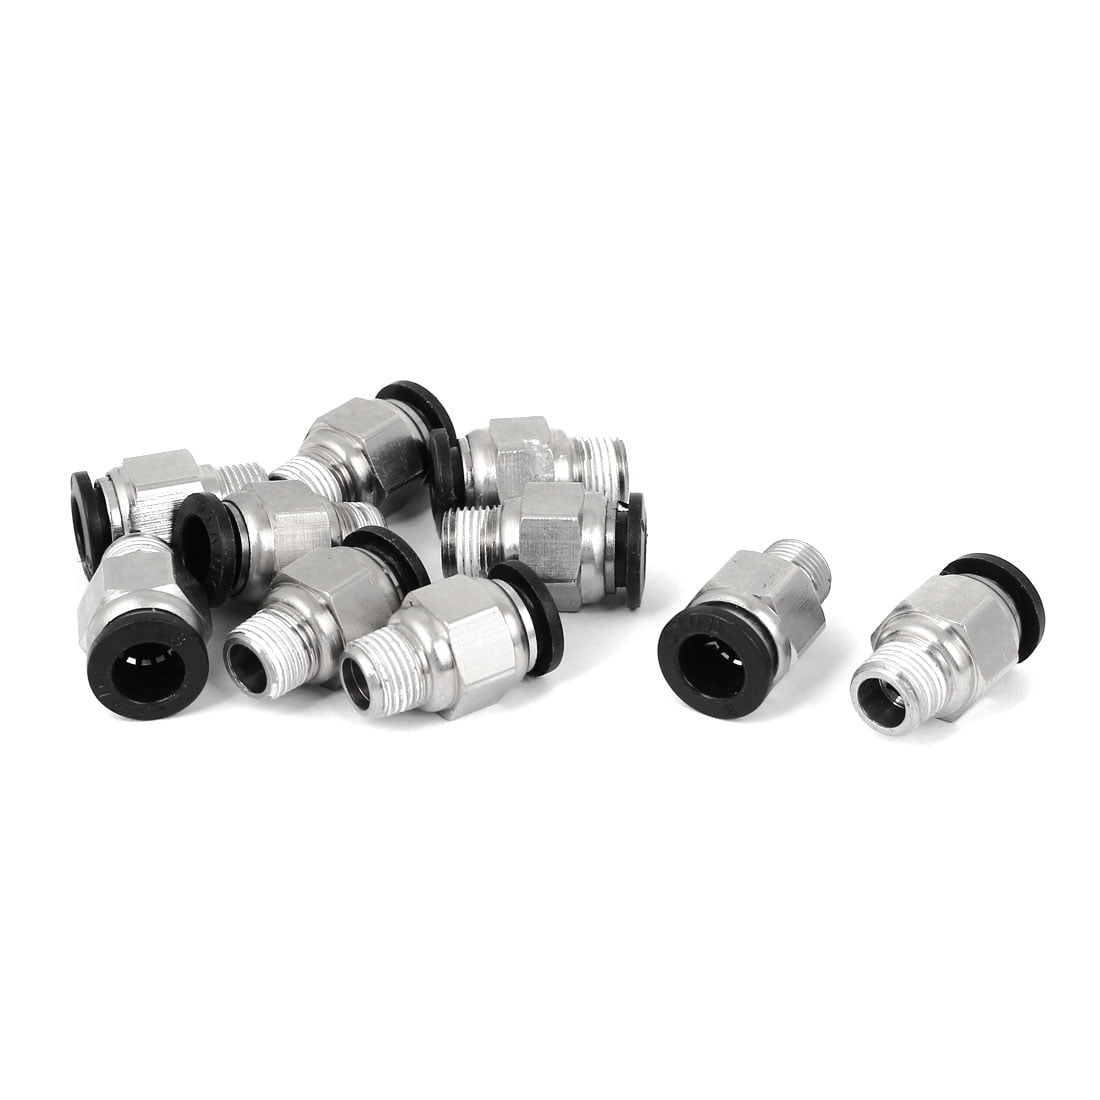 10 Pcs Air Pneumatic Quick Release Connector M8*1.25 Threaded metric 8mm Tube 